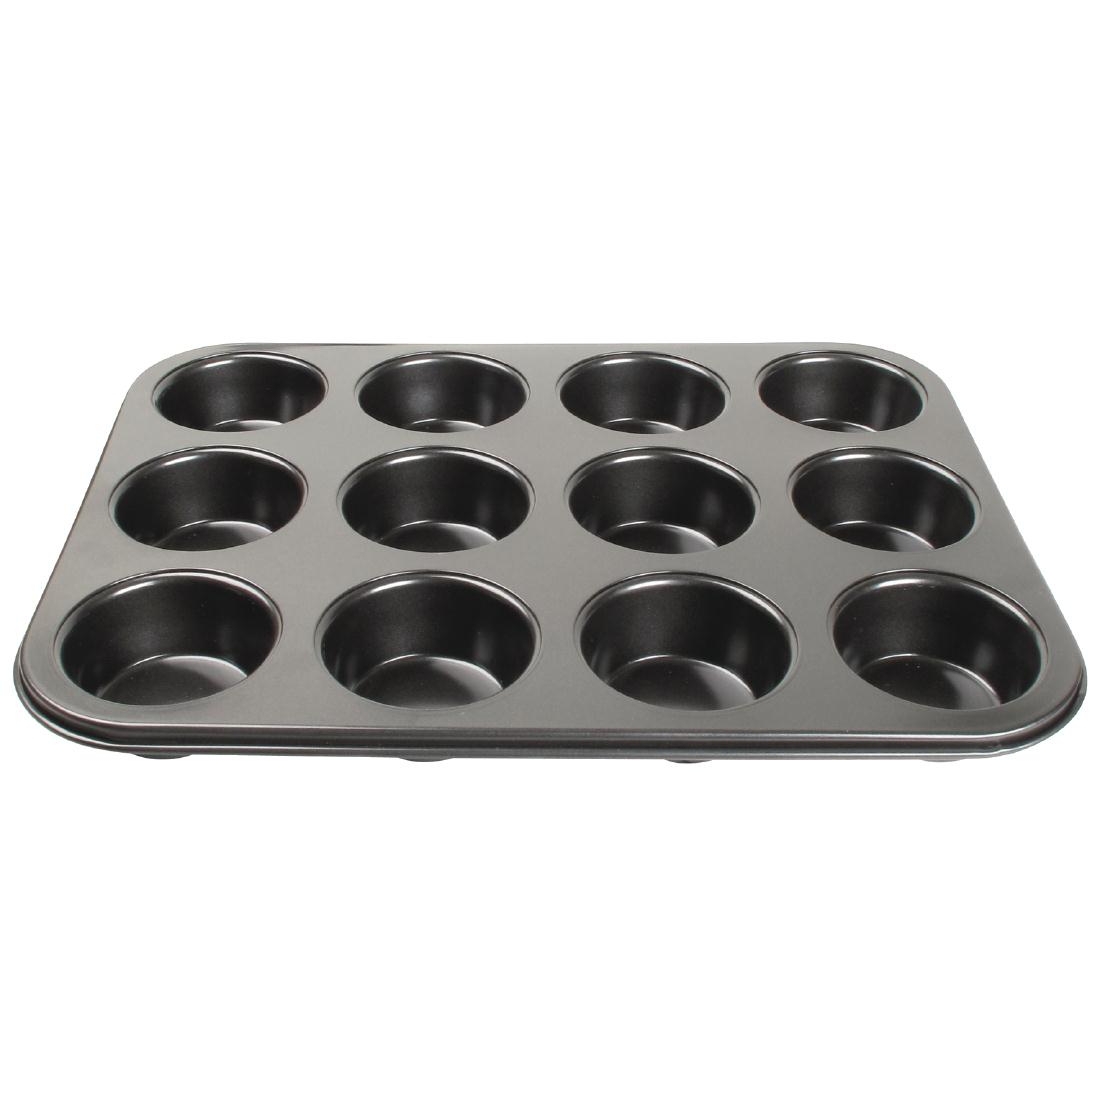 Vogue Carbon Steel Non-Stick Muffin Tray 12 Cup